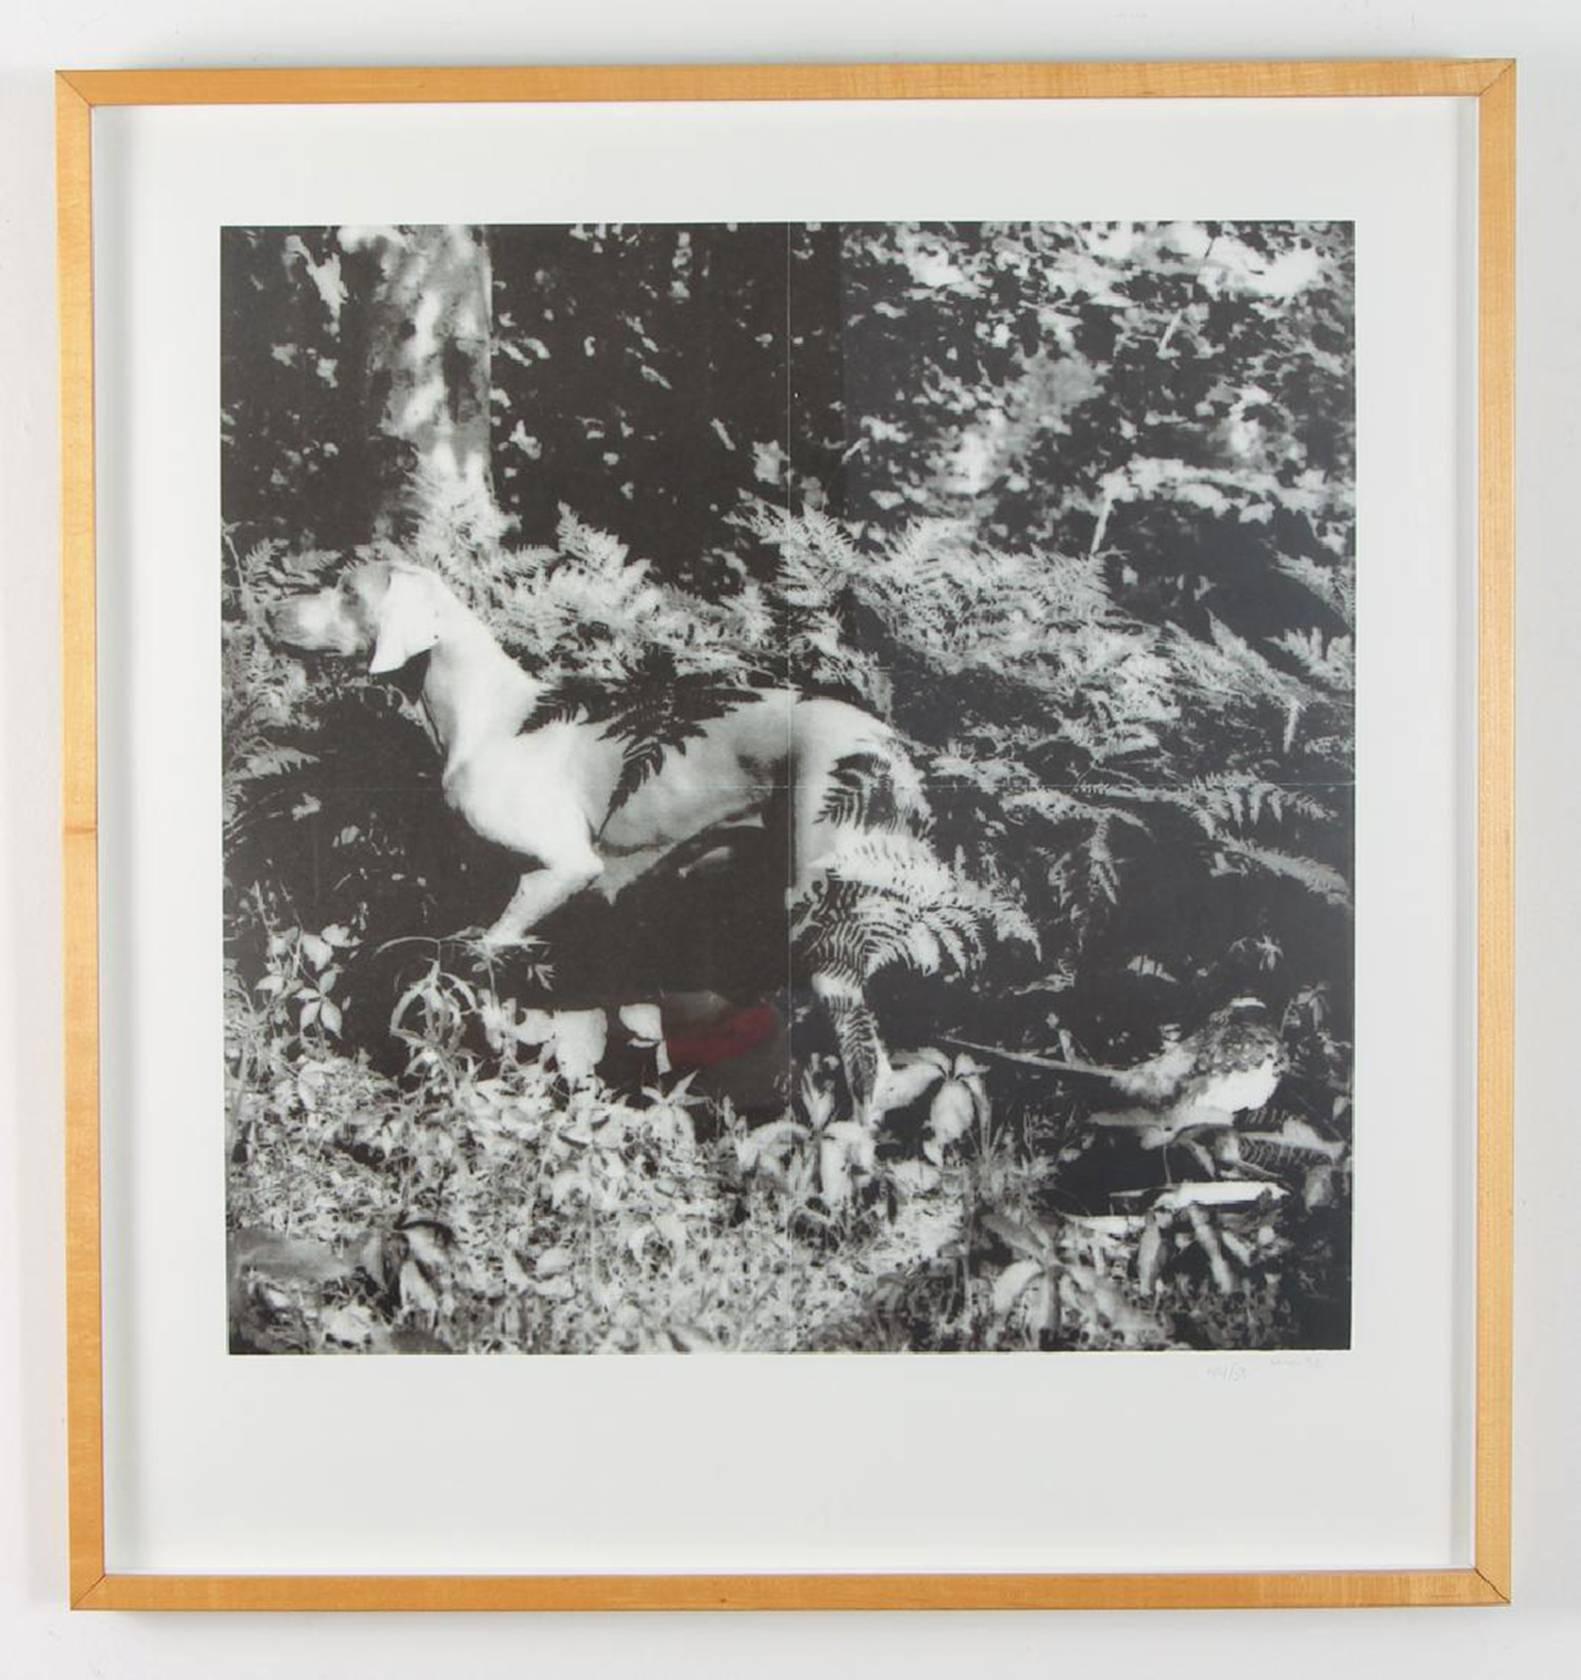 Artist: William Wegman (American, b. 1943)
Title: Bird Dog Suite, 1990
The Complete Set of 4 Photolithographs
Medium: 4 photolithographs
Dimensions: 19.5 x 19.5 inches (each image), (4 pieces)
Publisher: Segura Publishing Company

Signed WW 90 and